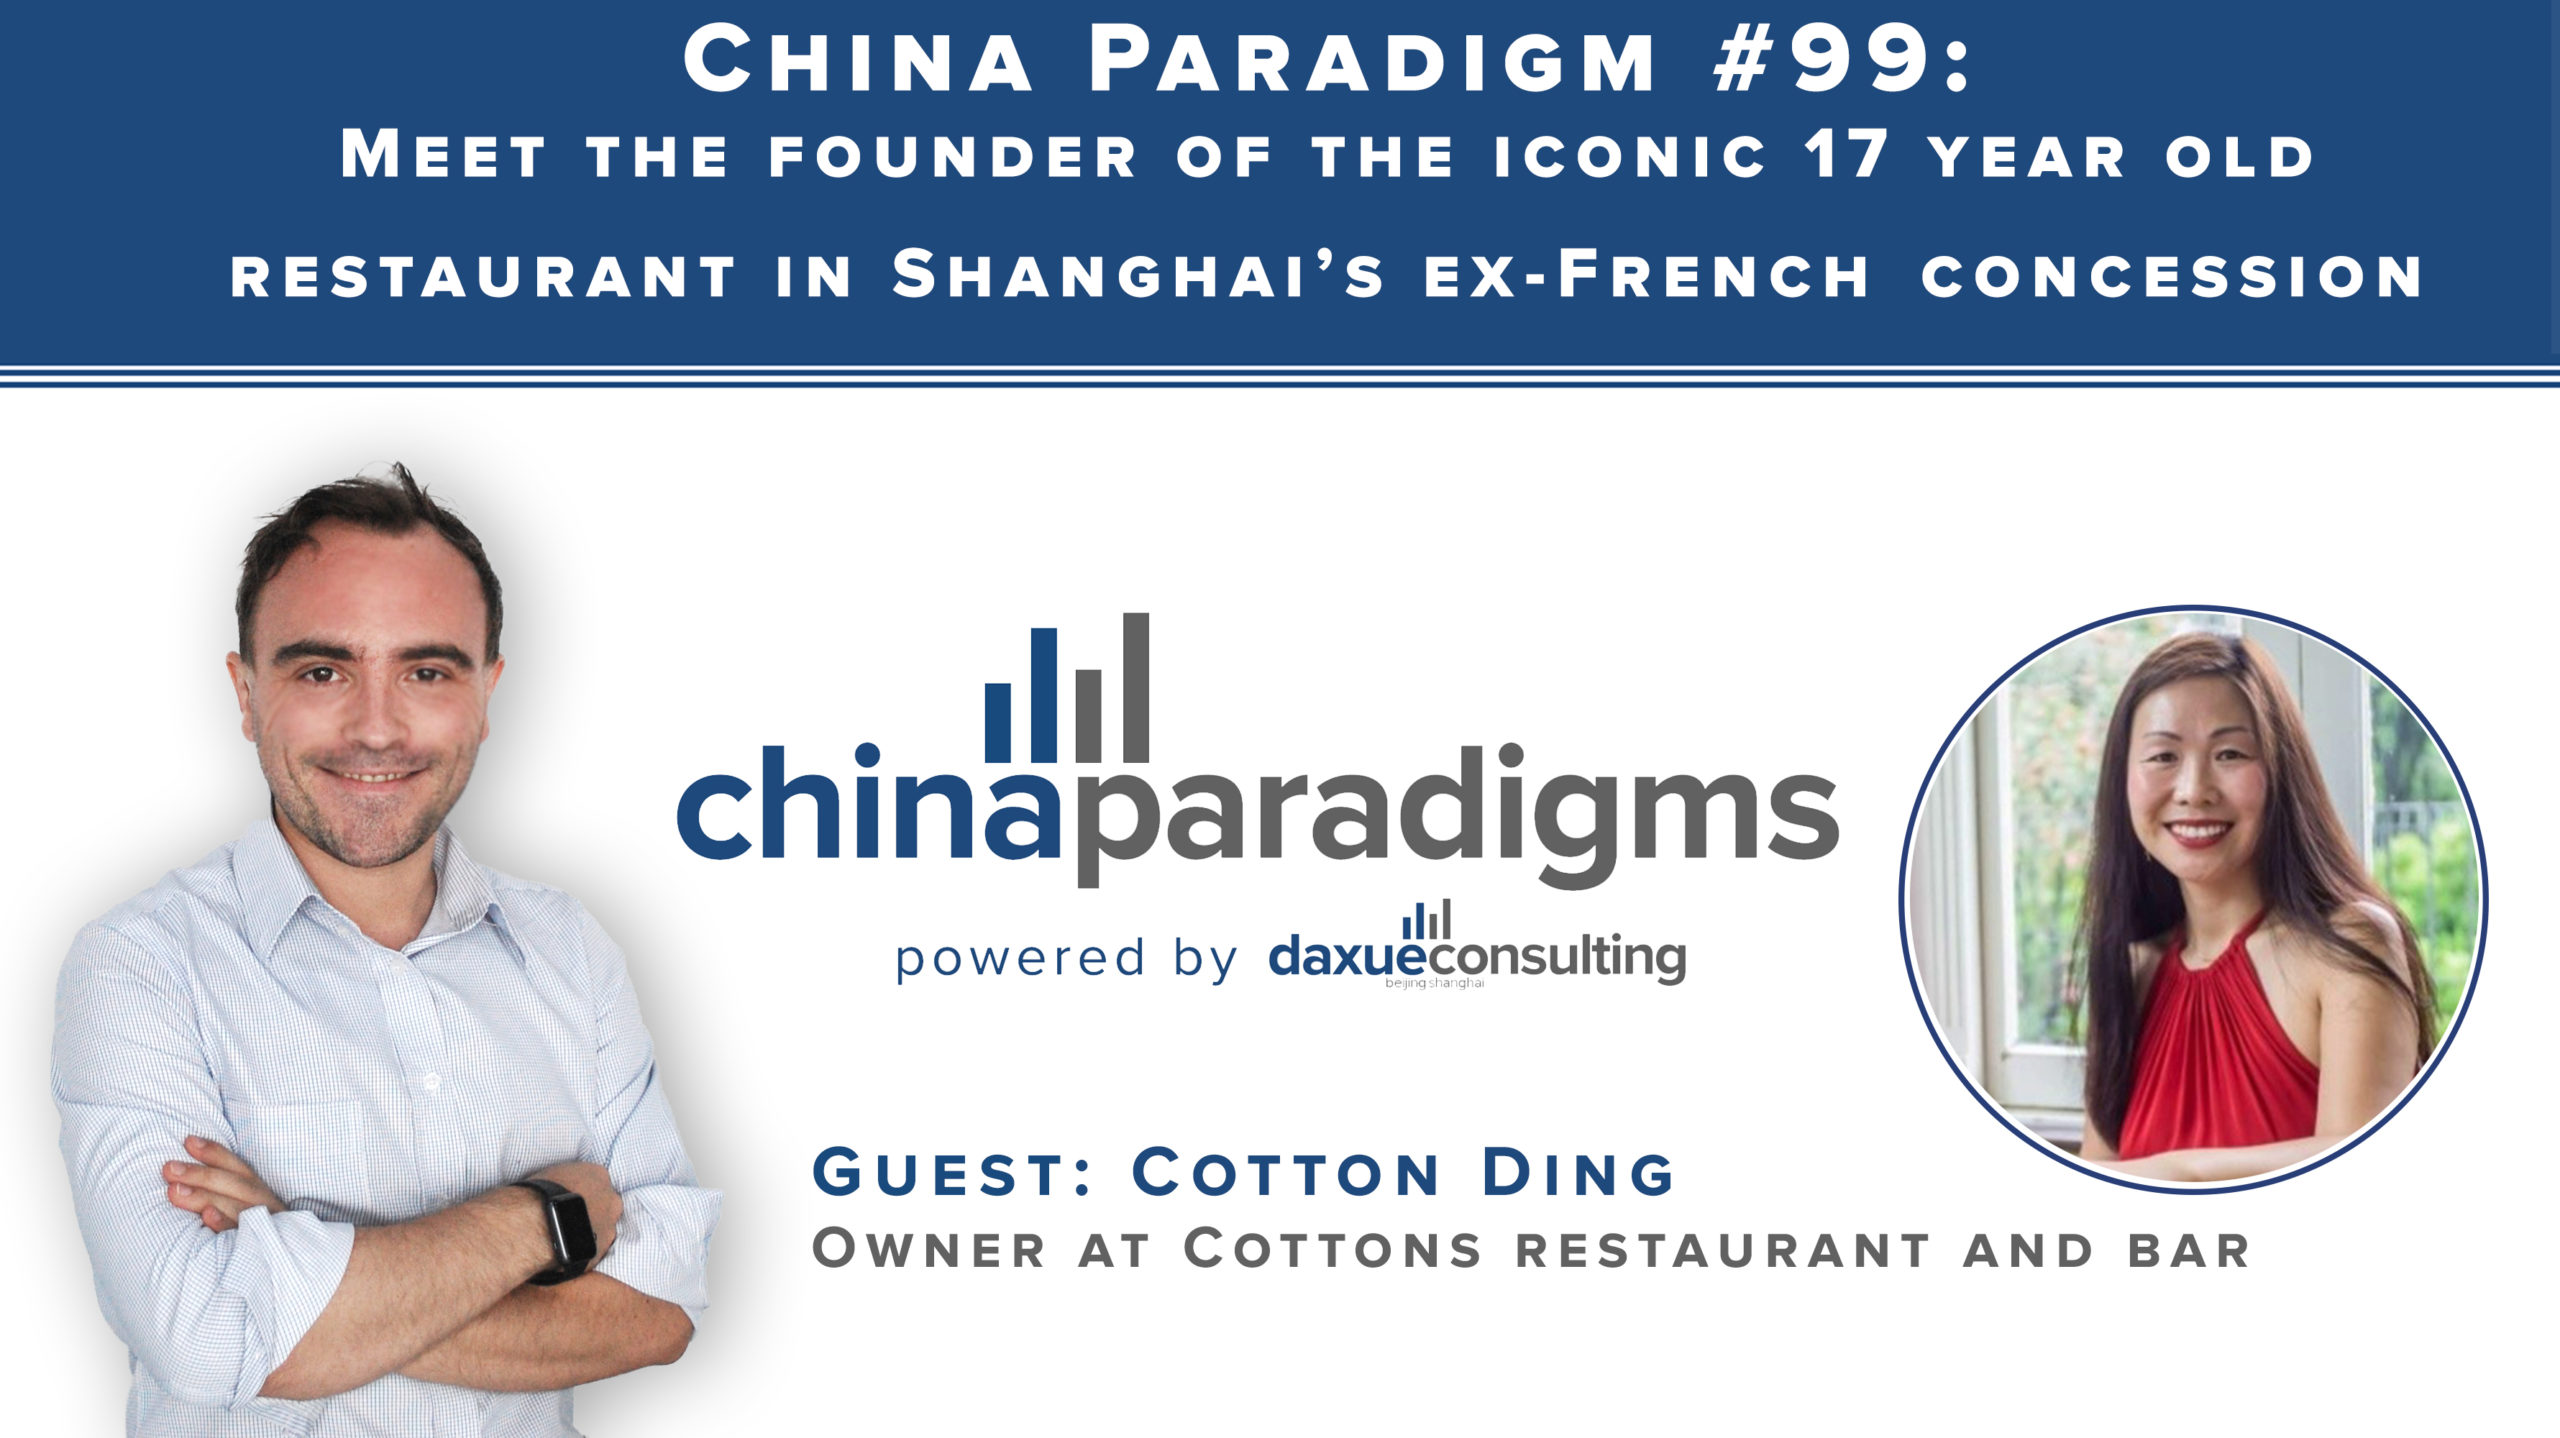 China Paradigm 99: Meet the founder of the iconic 17 year old restaurant in Shanghai’s ex French concession